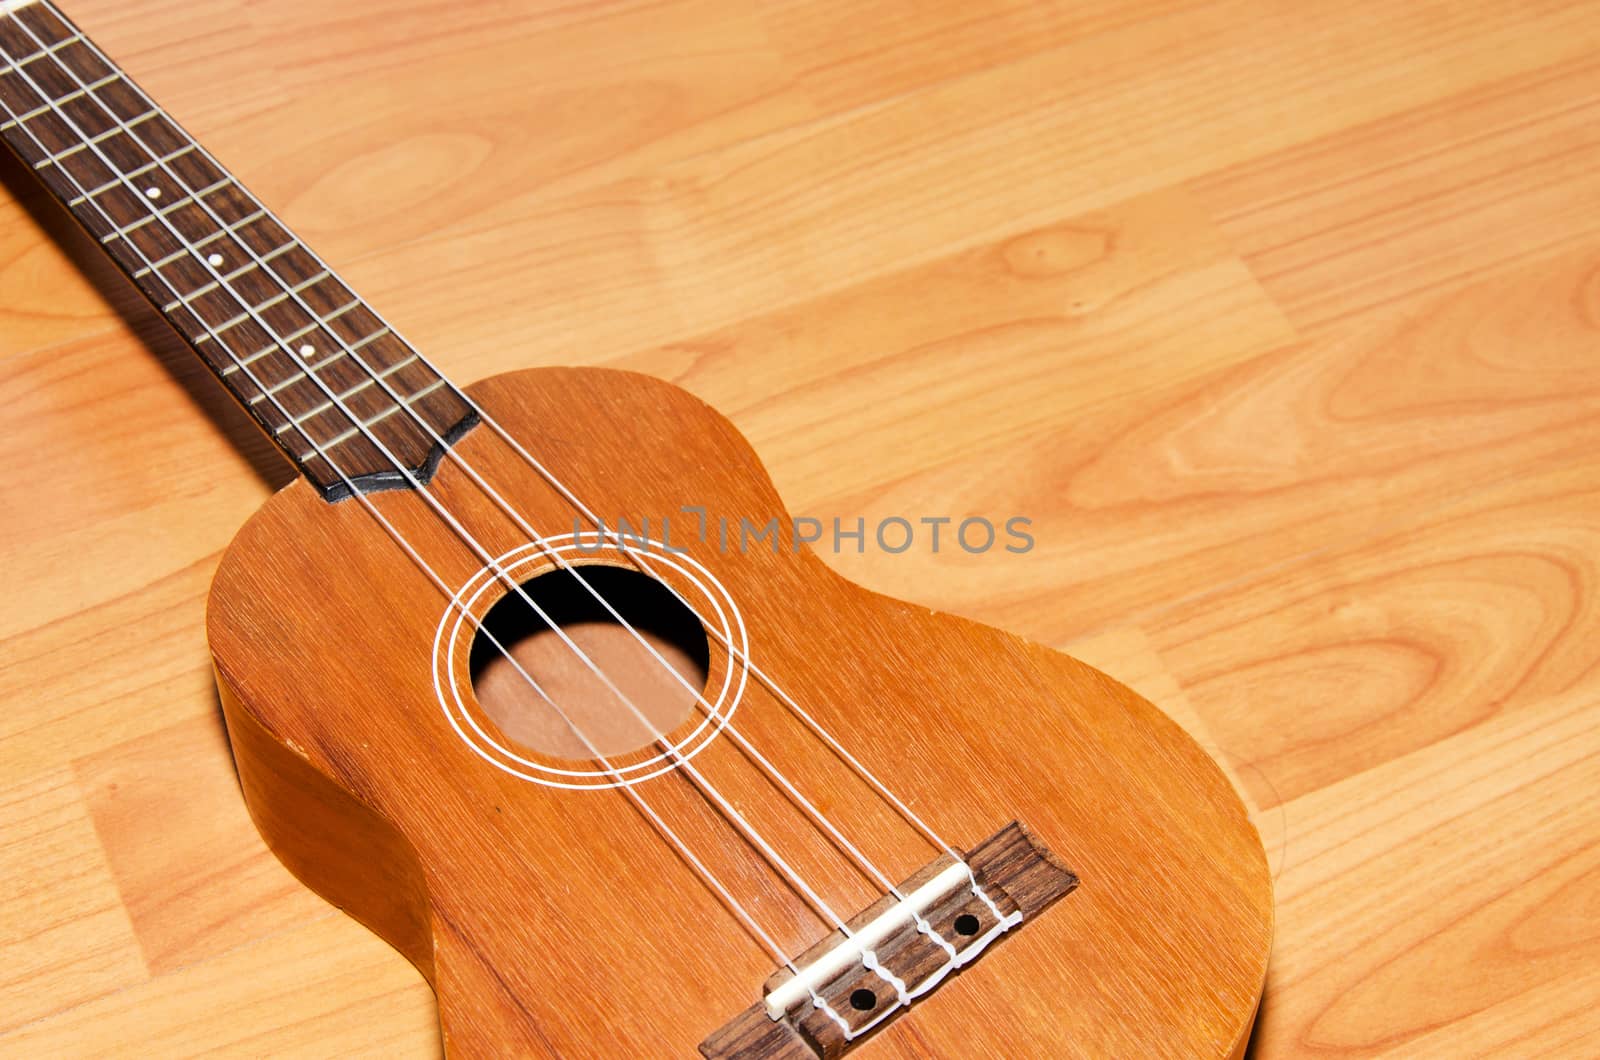 The ukulele is placed on a vintage wooden floor.